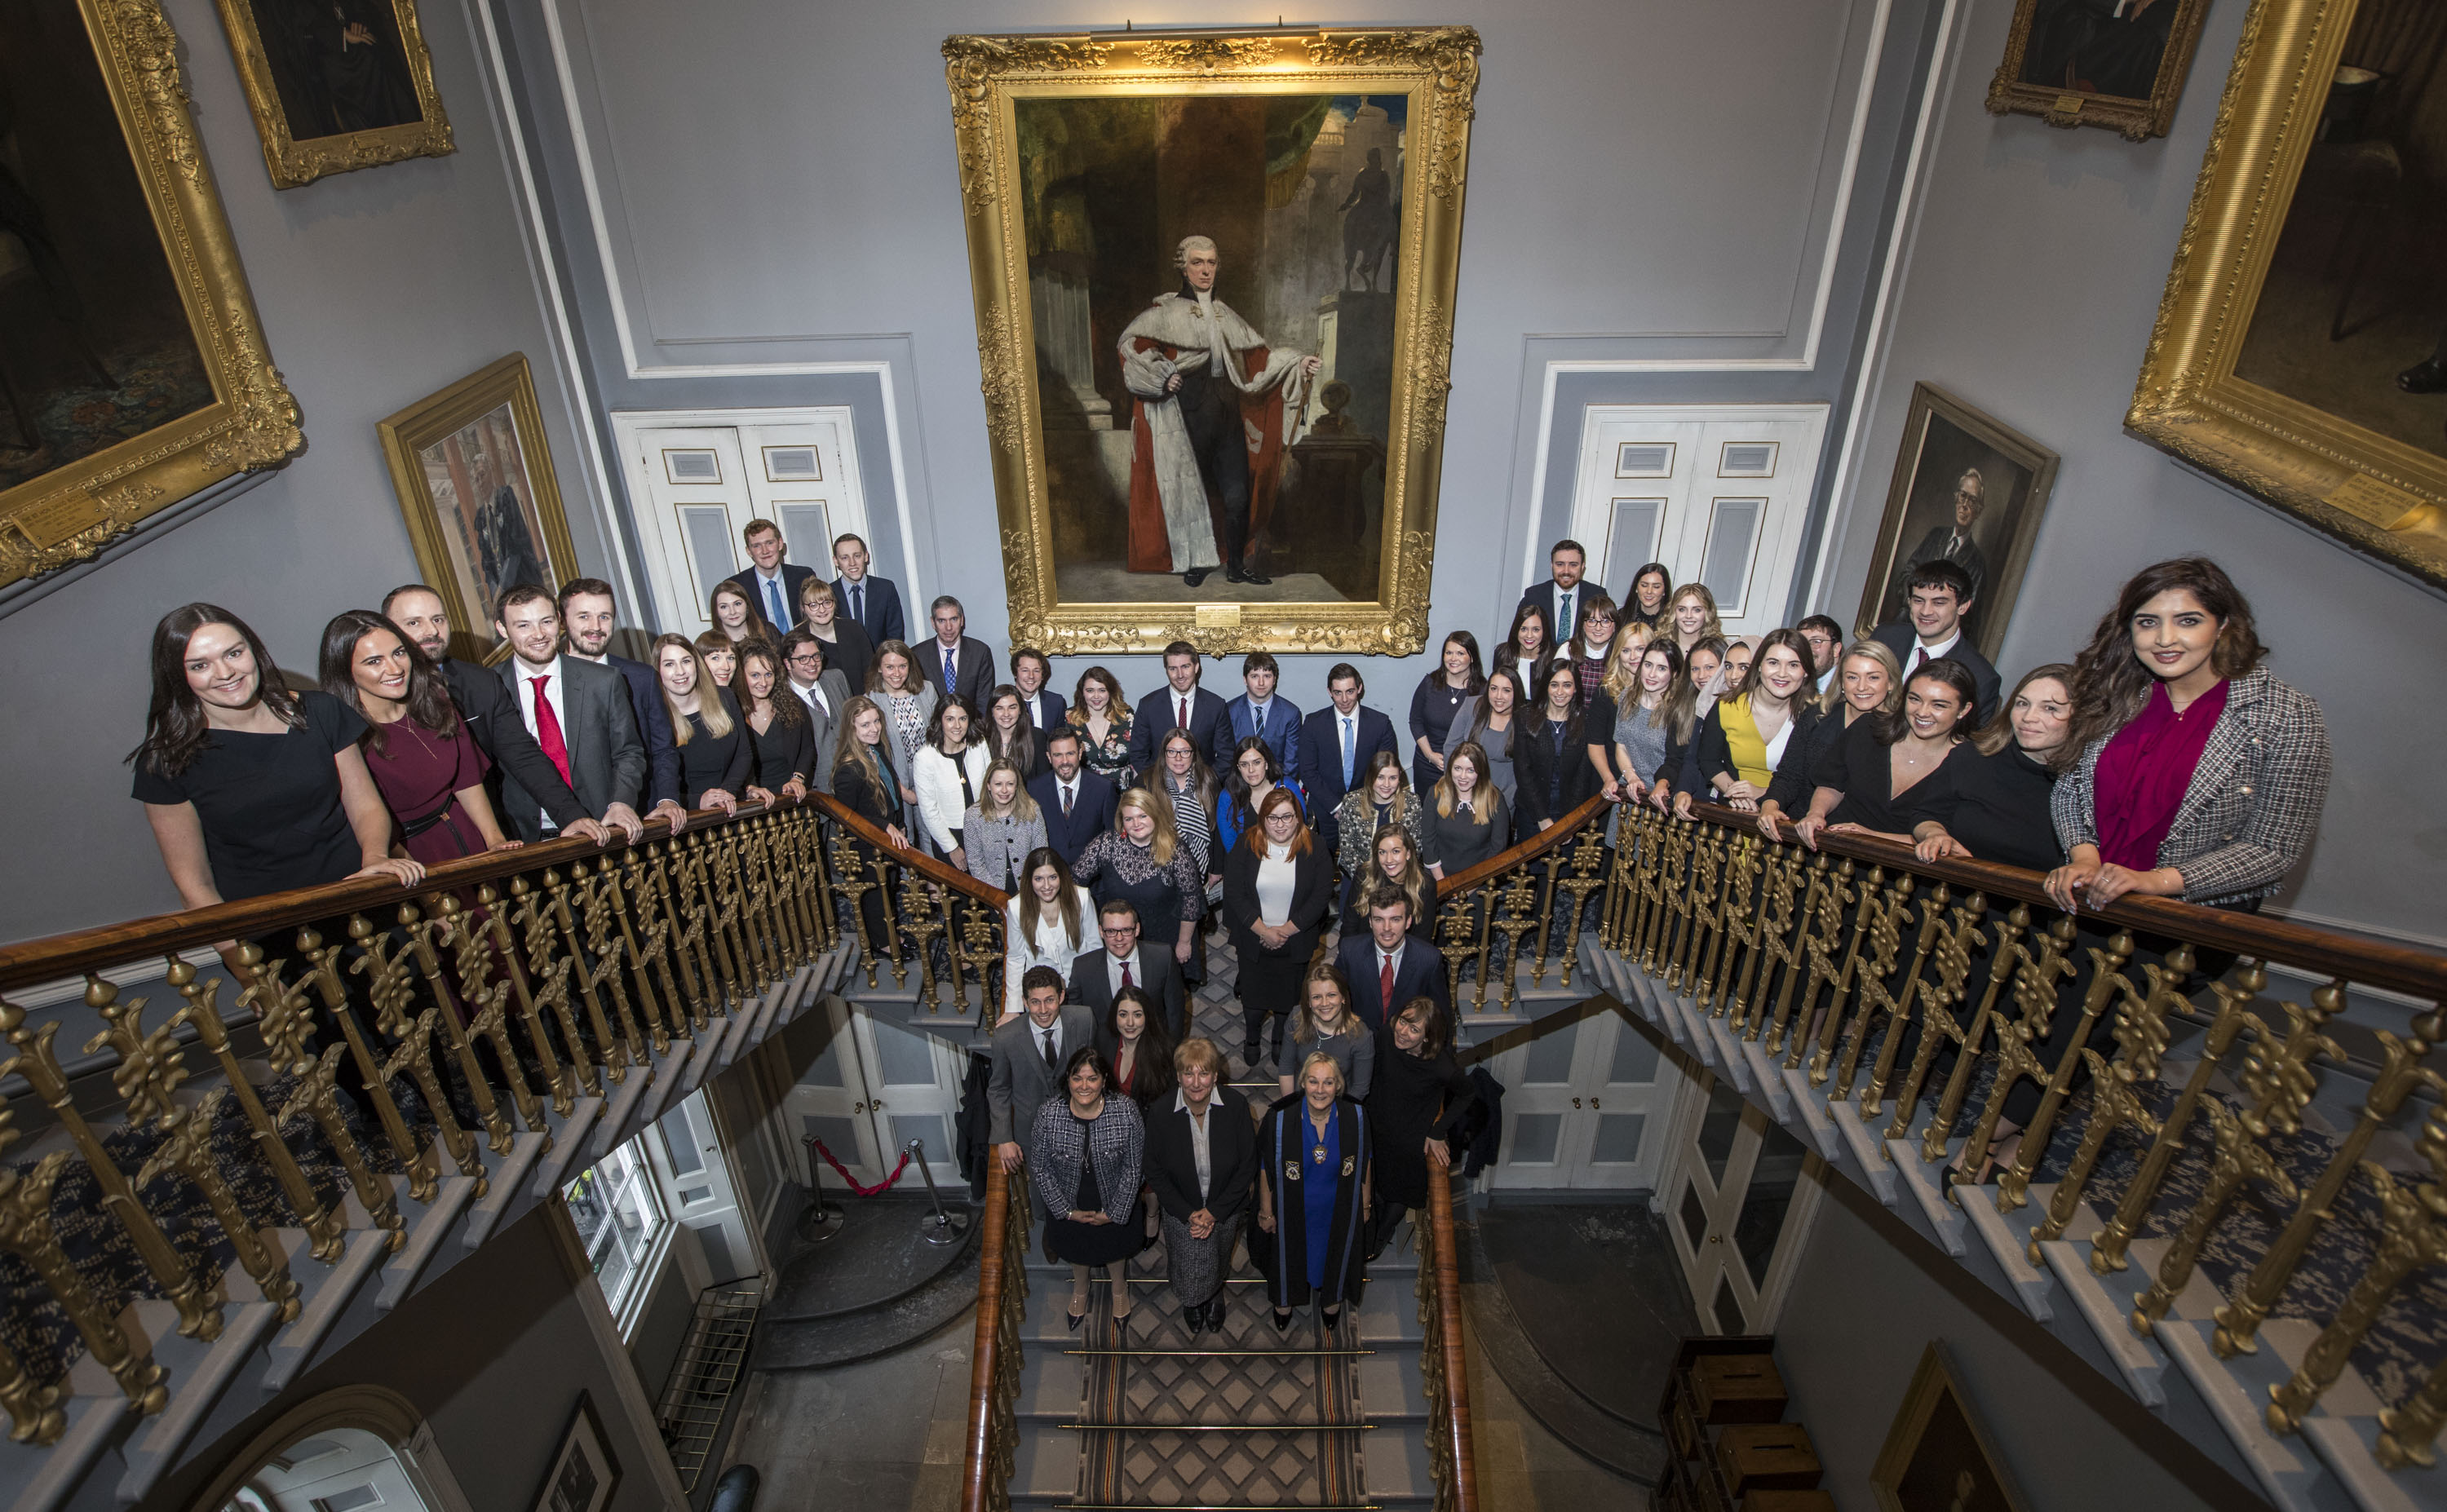 Sixty-one new solicitors welcomed to the profession